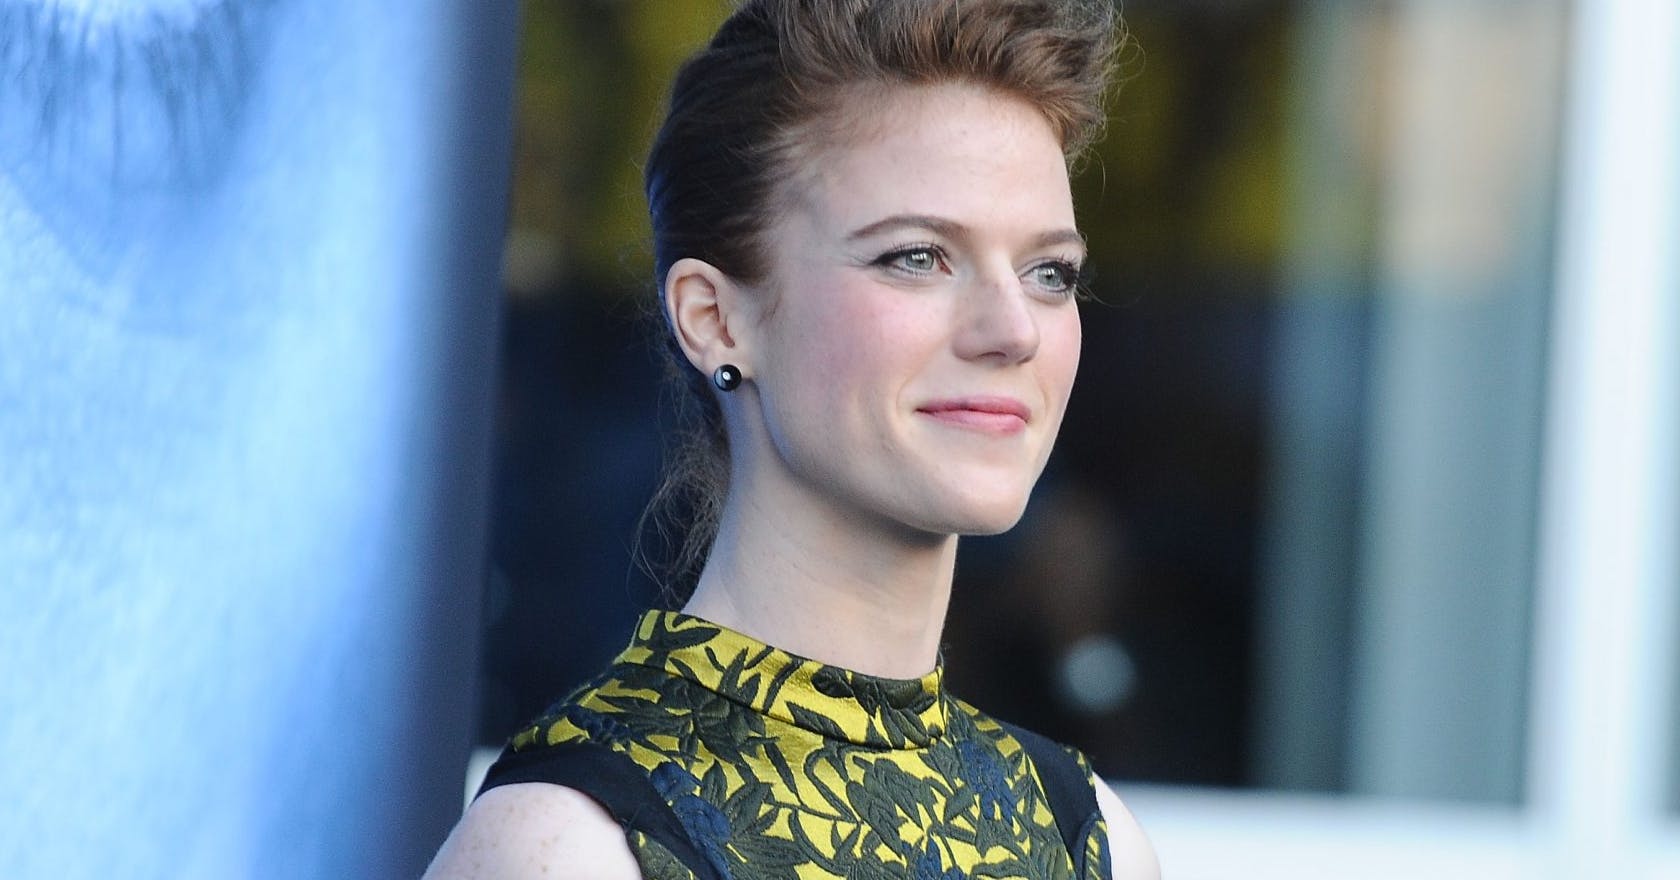 The Time Traveler’s Wife: Rose Leslie will star in the new TV adaptation